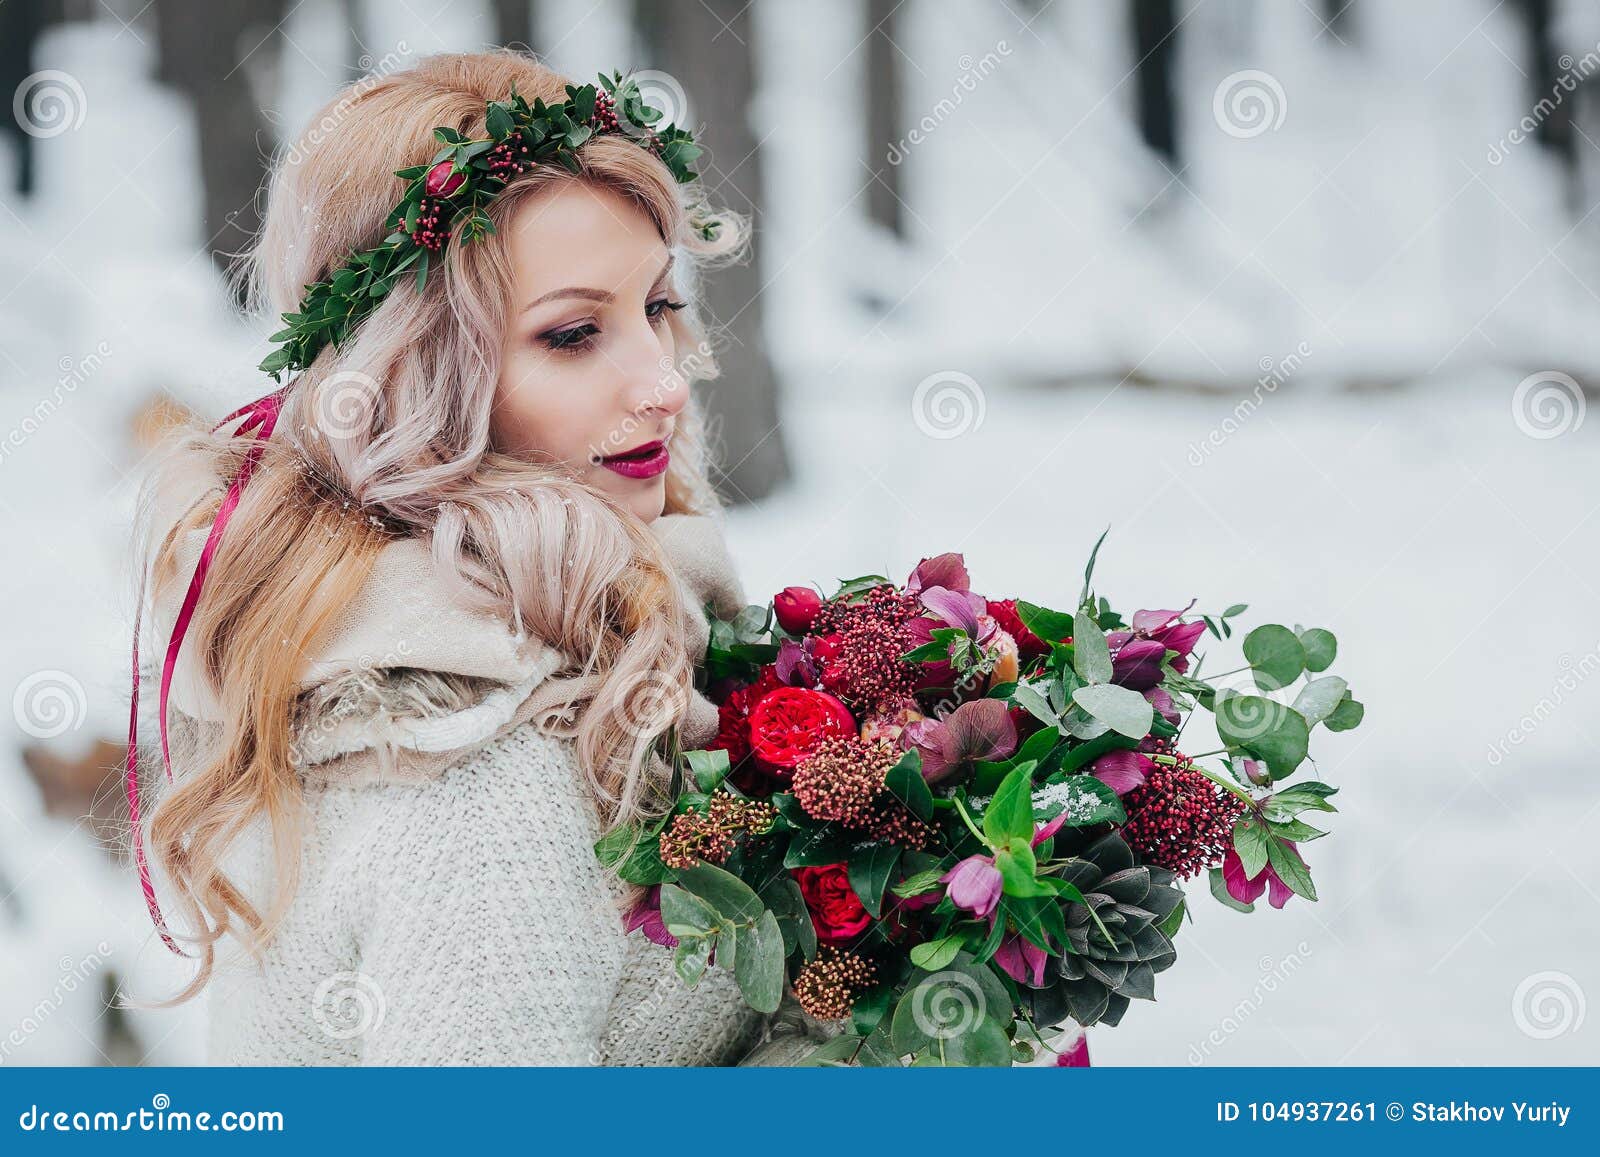 https://thumbs.dreamstime.com/z/young-girl-slavic-appearance-wreath-wildflowers-beautiful-bride-holds-bouquet-winter-background-young-girl-104937261.jpg